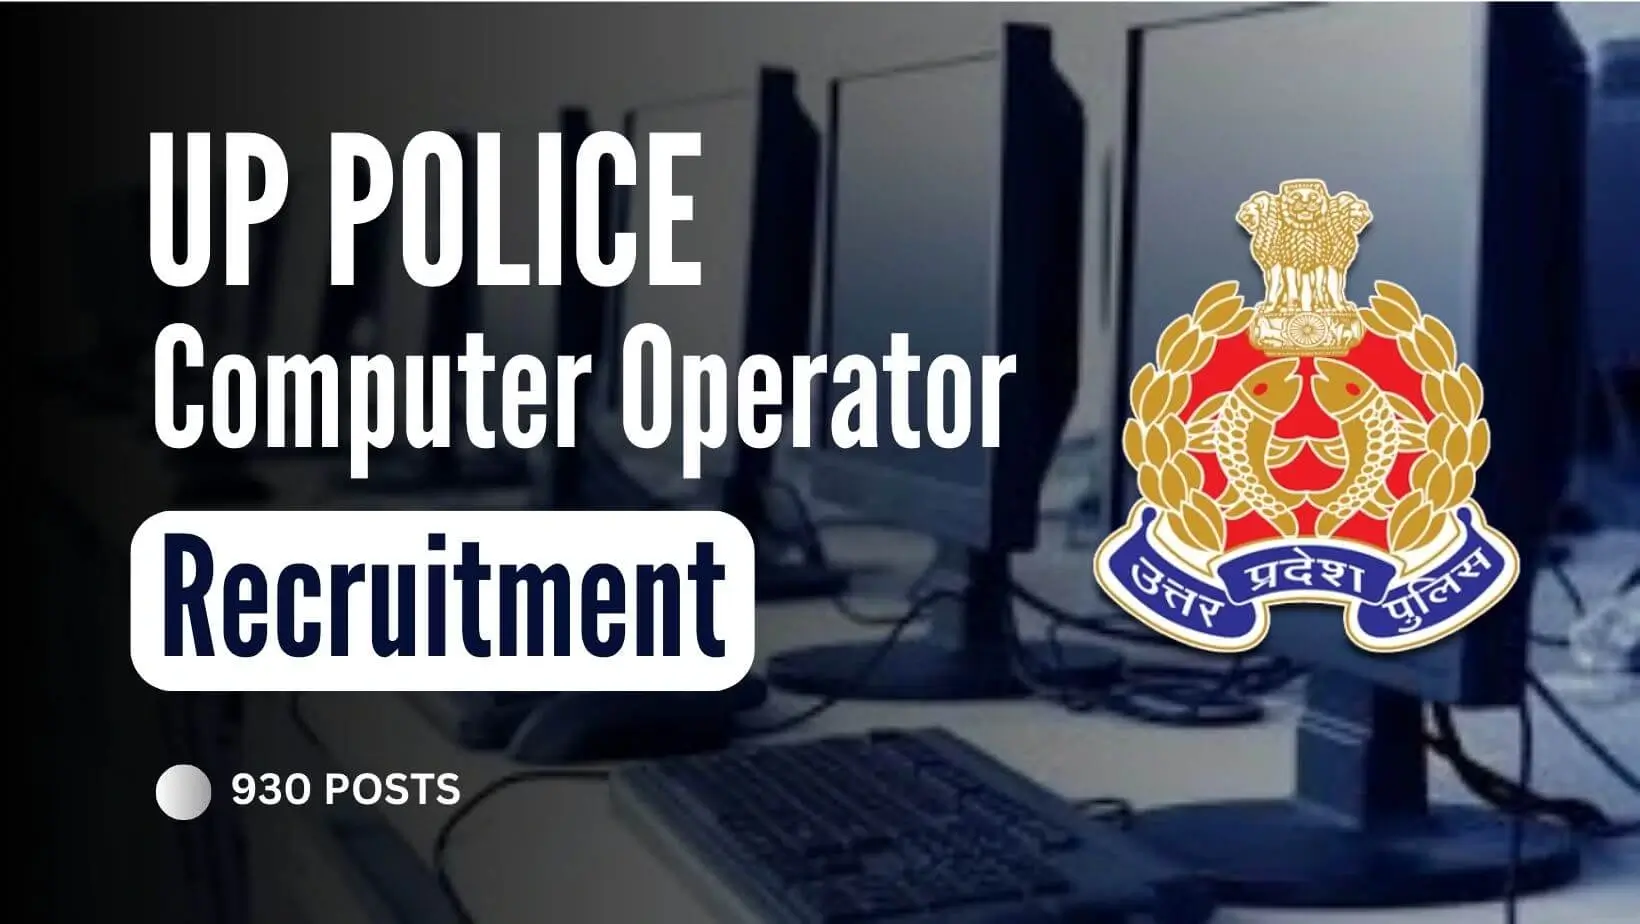 UP Police Computer Operator Grade-A Recruitment Notification is Out Now, Salary, Syllabus and Exam Pattern, Eligibility and others details.